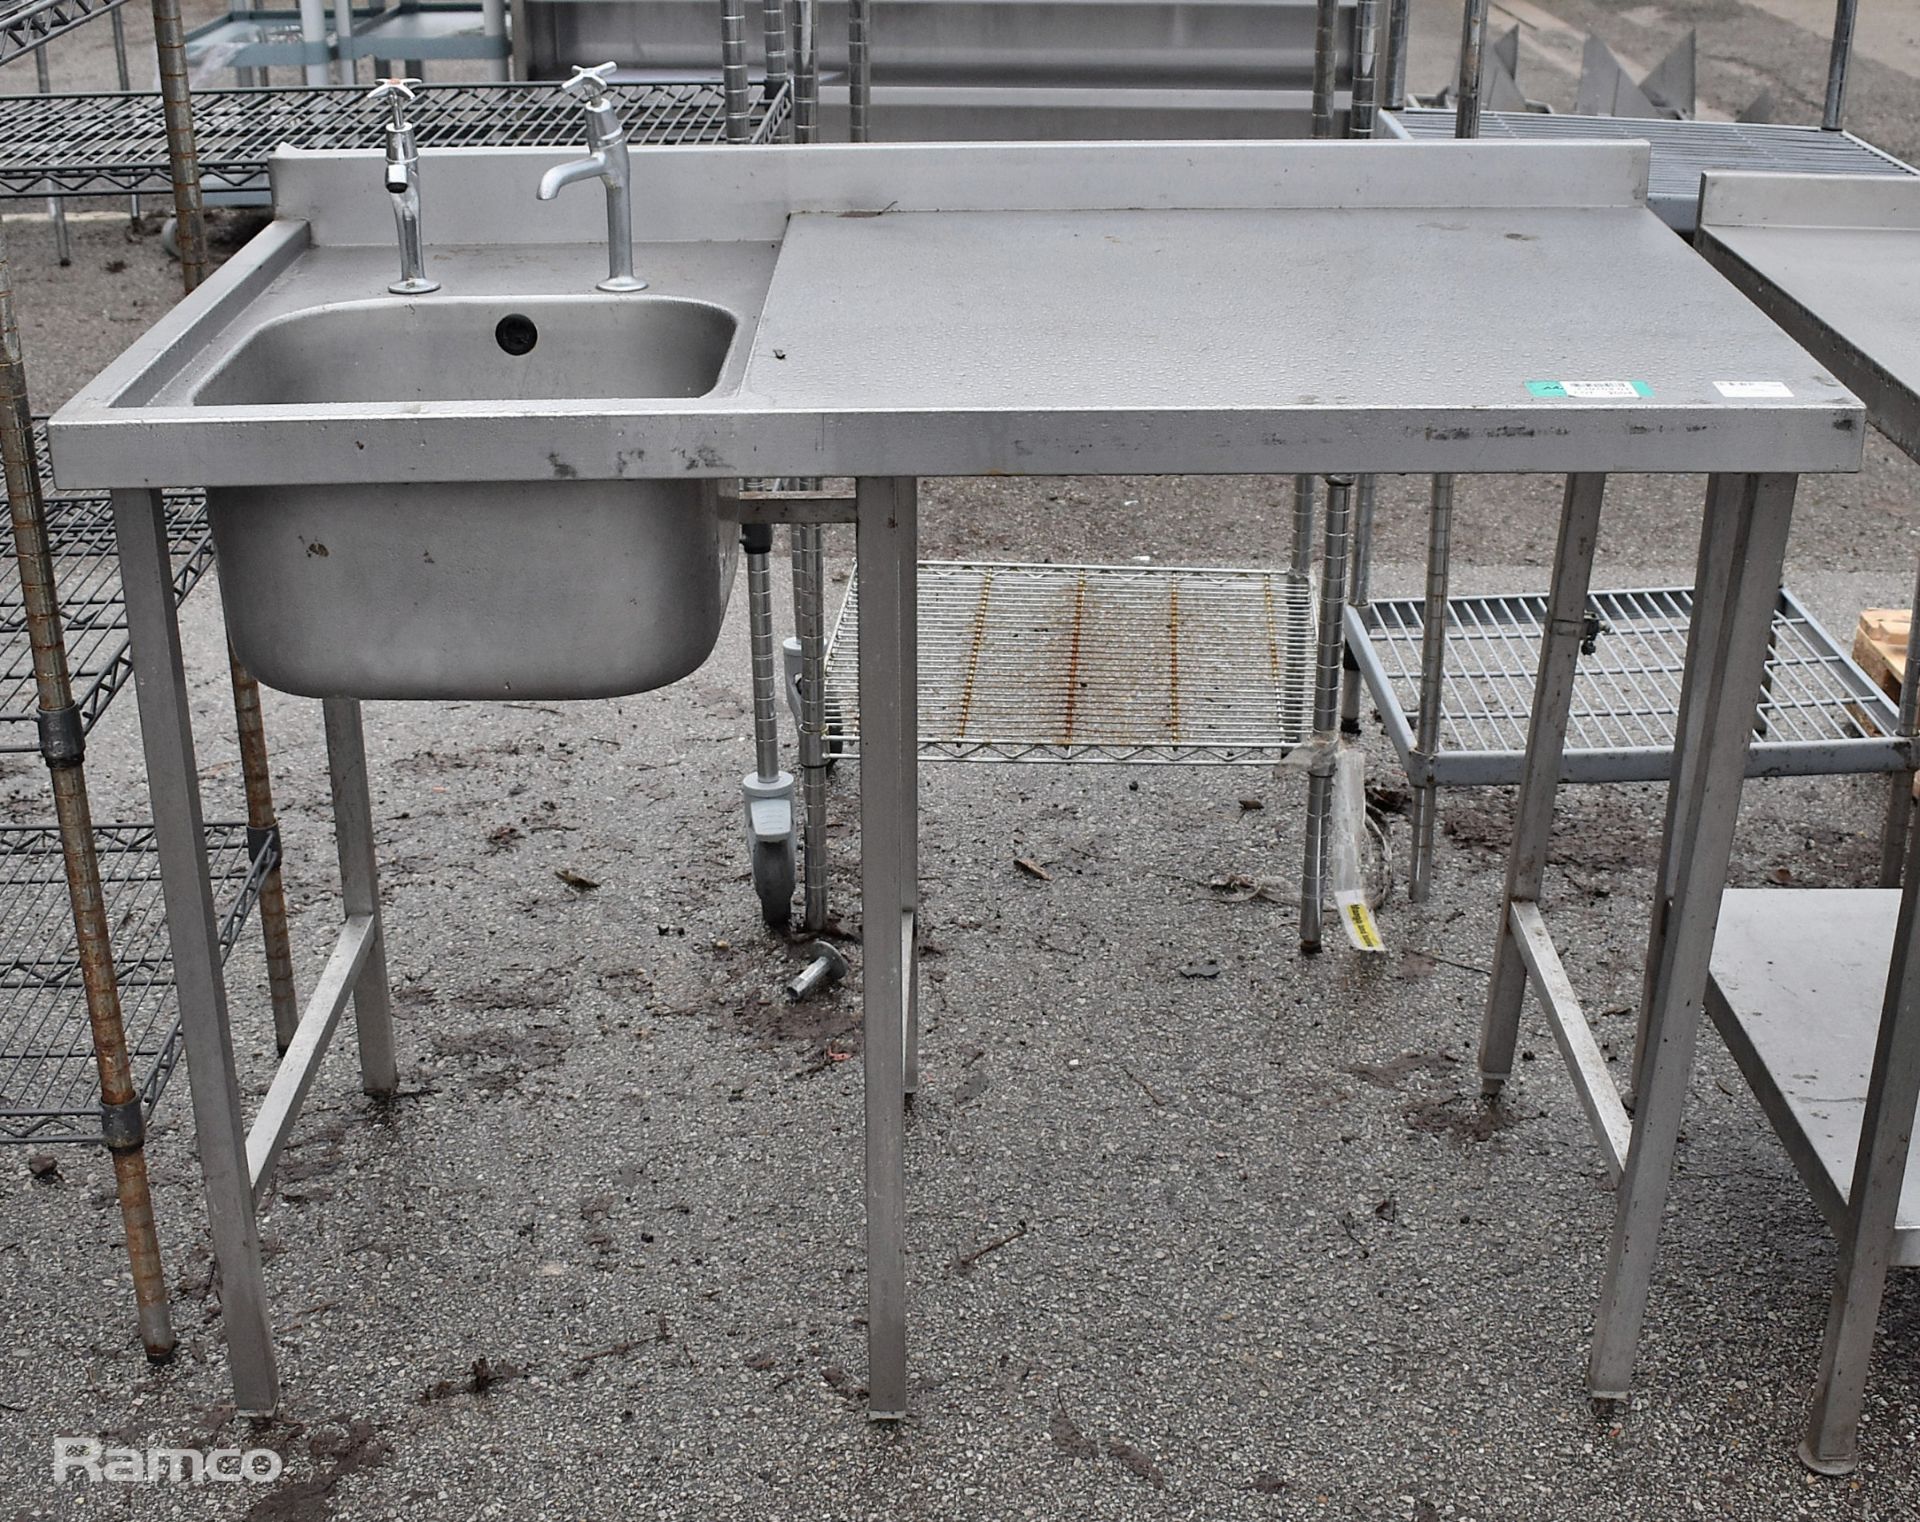 Stainless steel sink unit with upstand - dimensions: 130x70x96cm